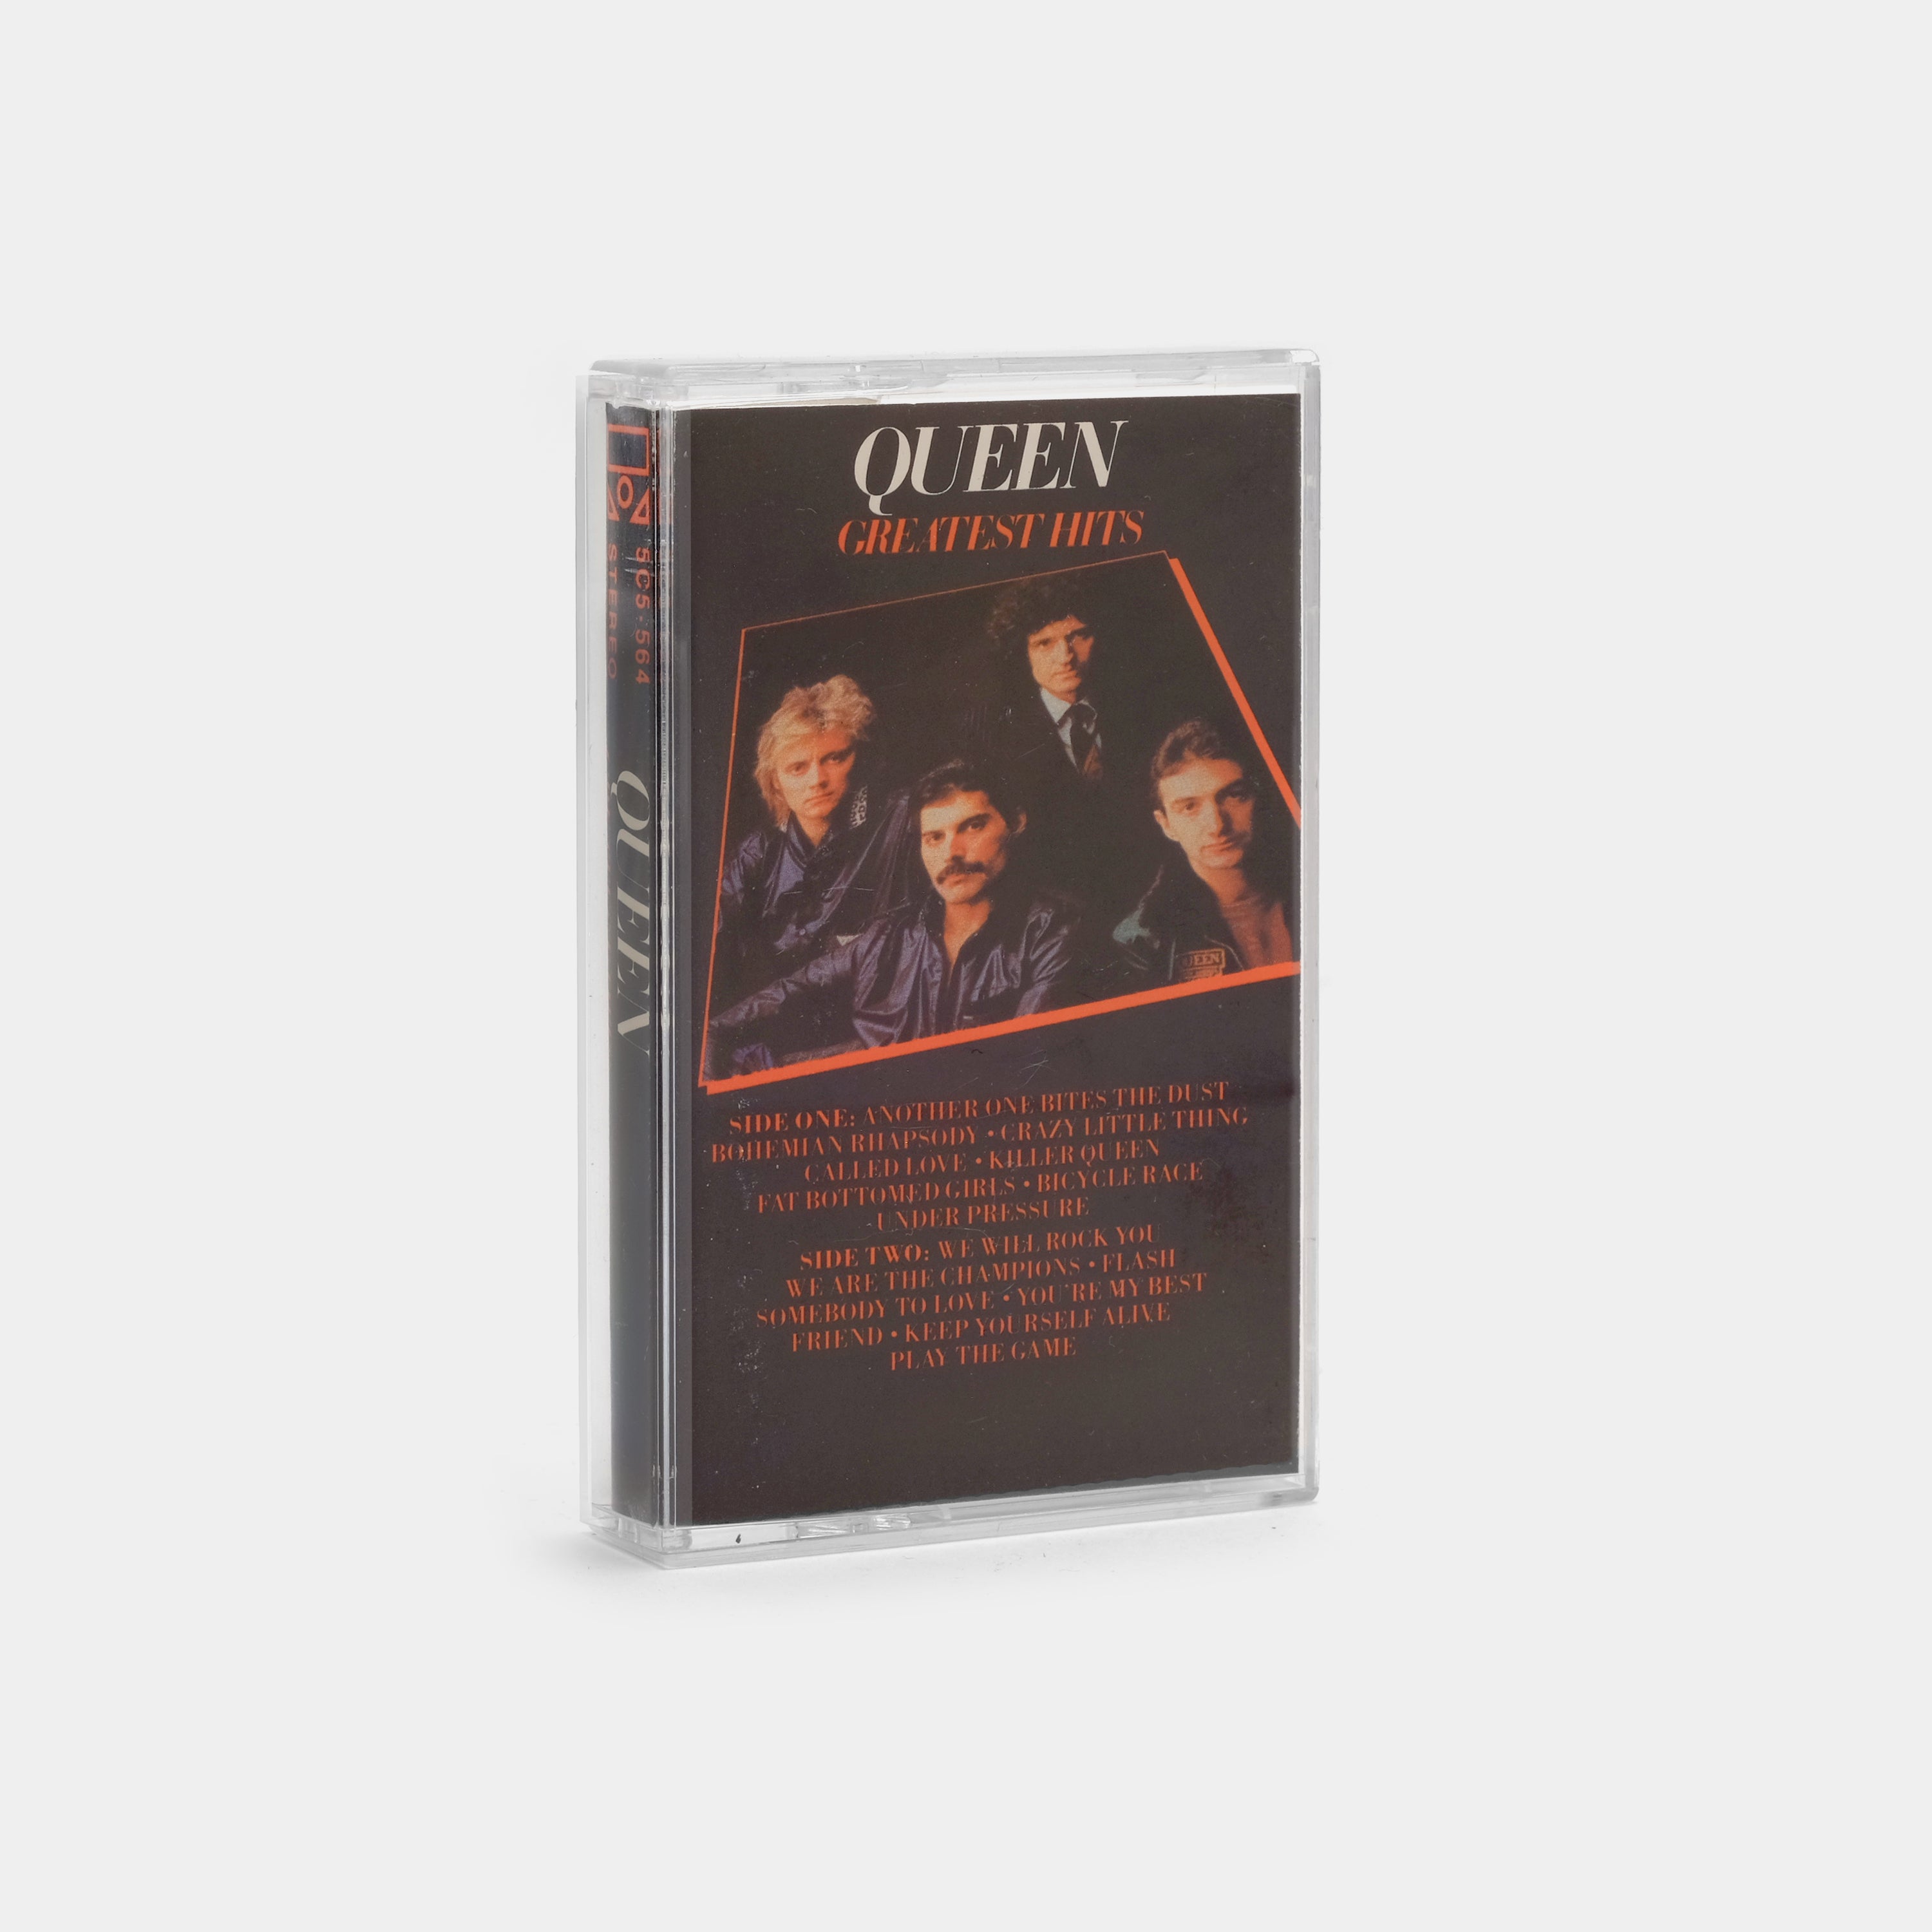 Queen - Greatest Hits Cassette Tape